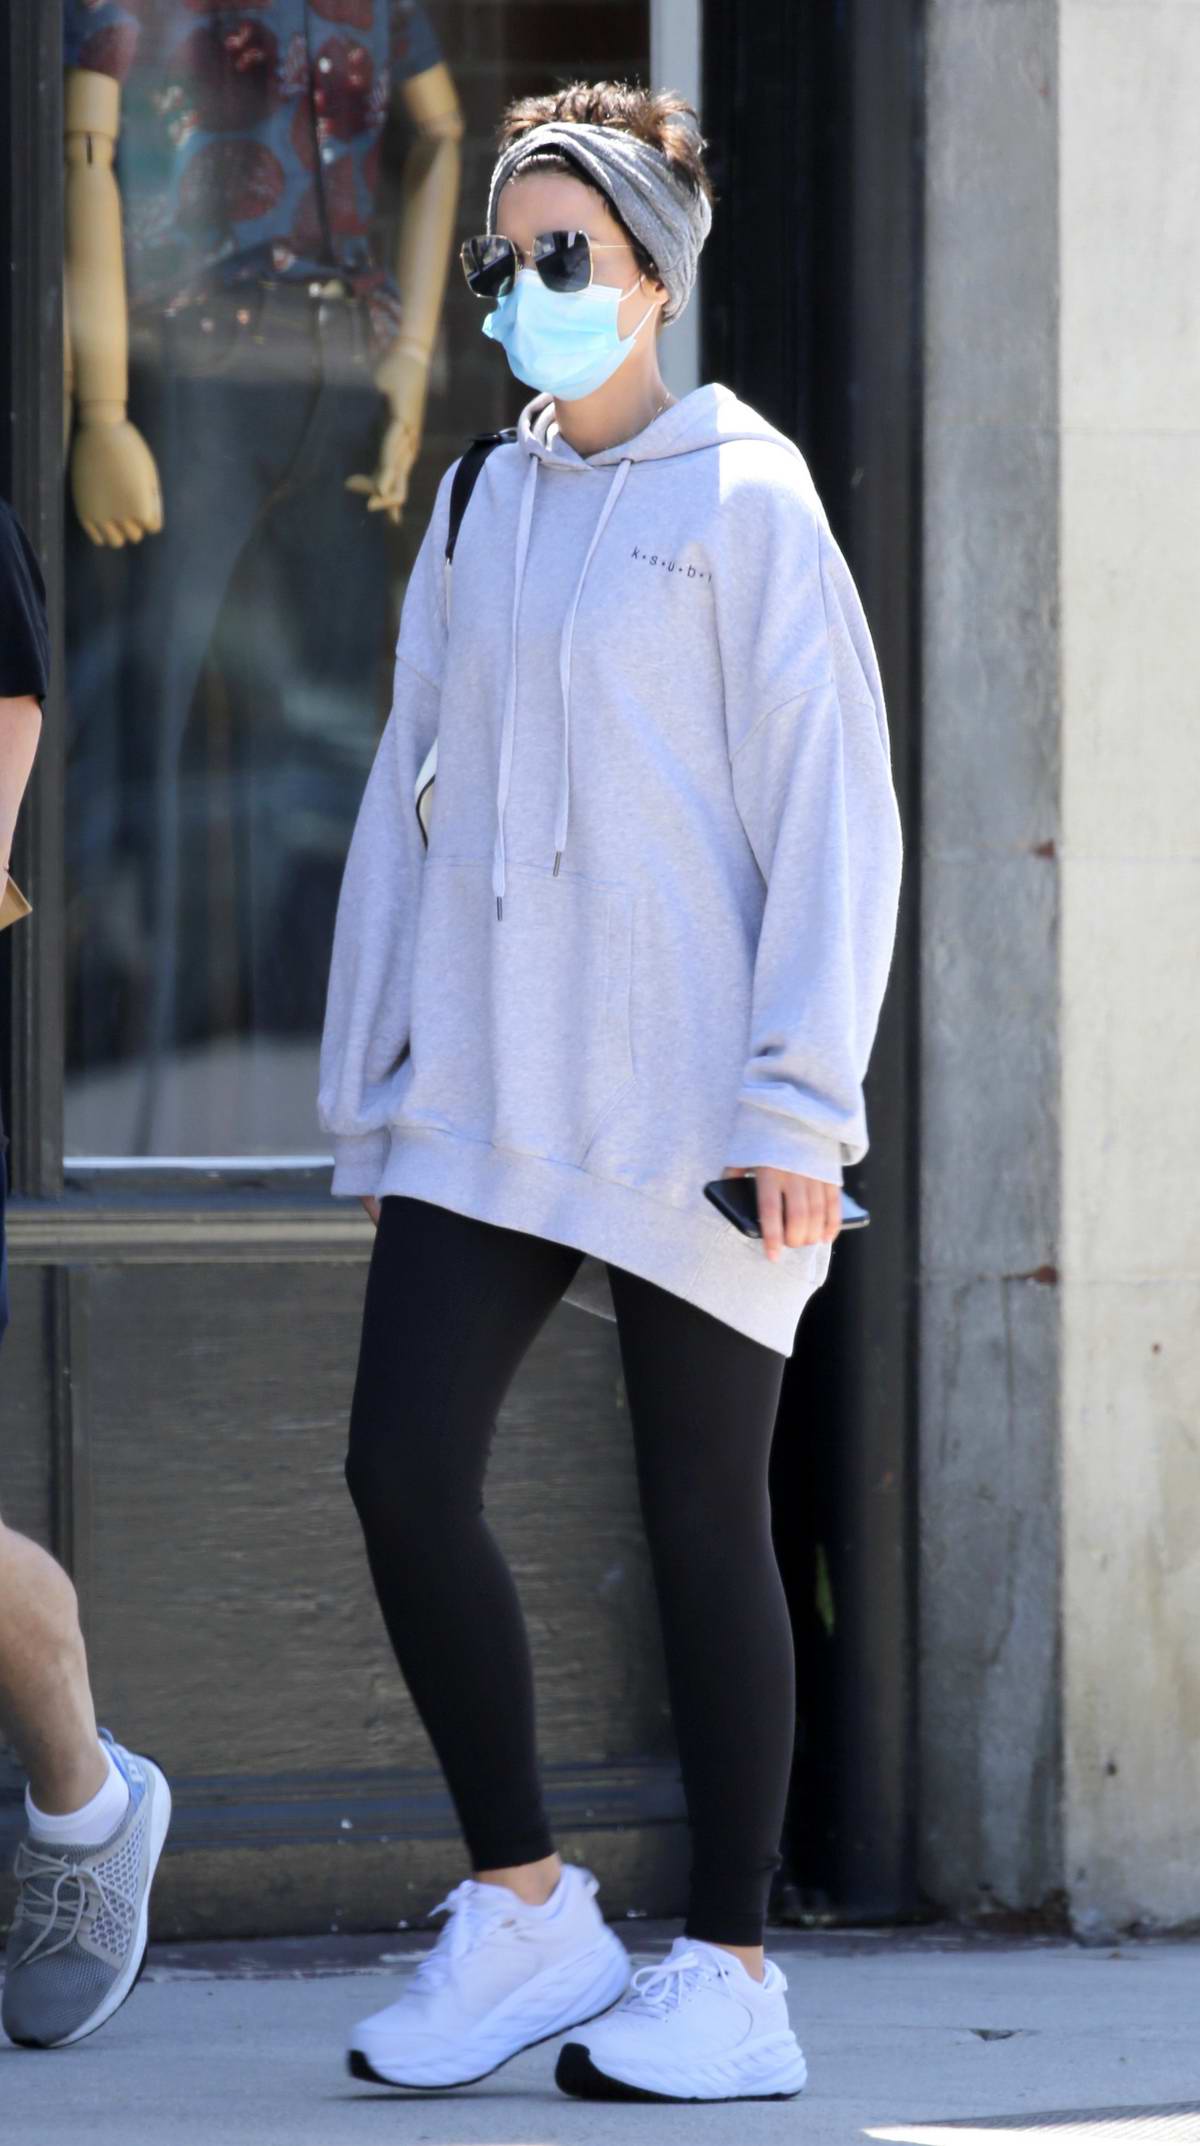 https://www.celebsfirst.com/wp-content/uploads/2020/07/jaimie-alexander-keeps-it-comfy-in-oversized-hoodie-and-leggings-while-out-for-stroll-in-los-angeles-160720_3.jpg